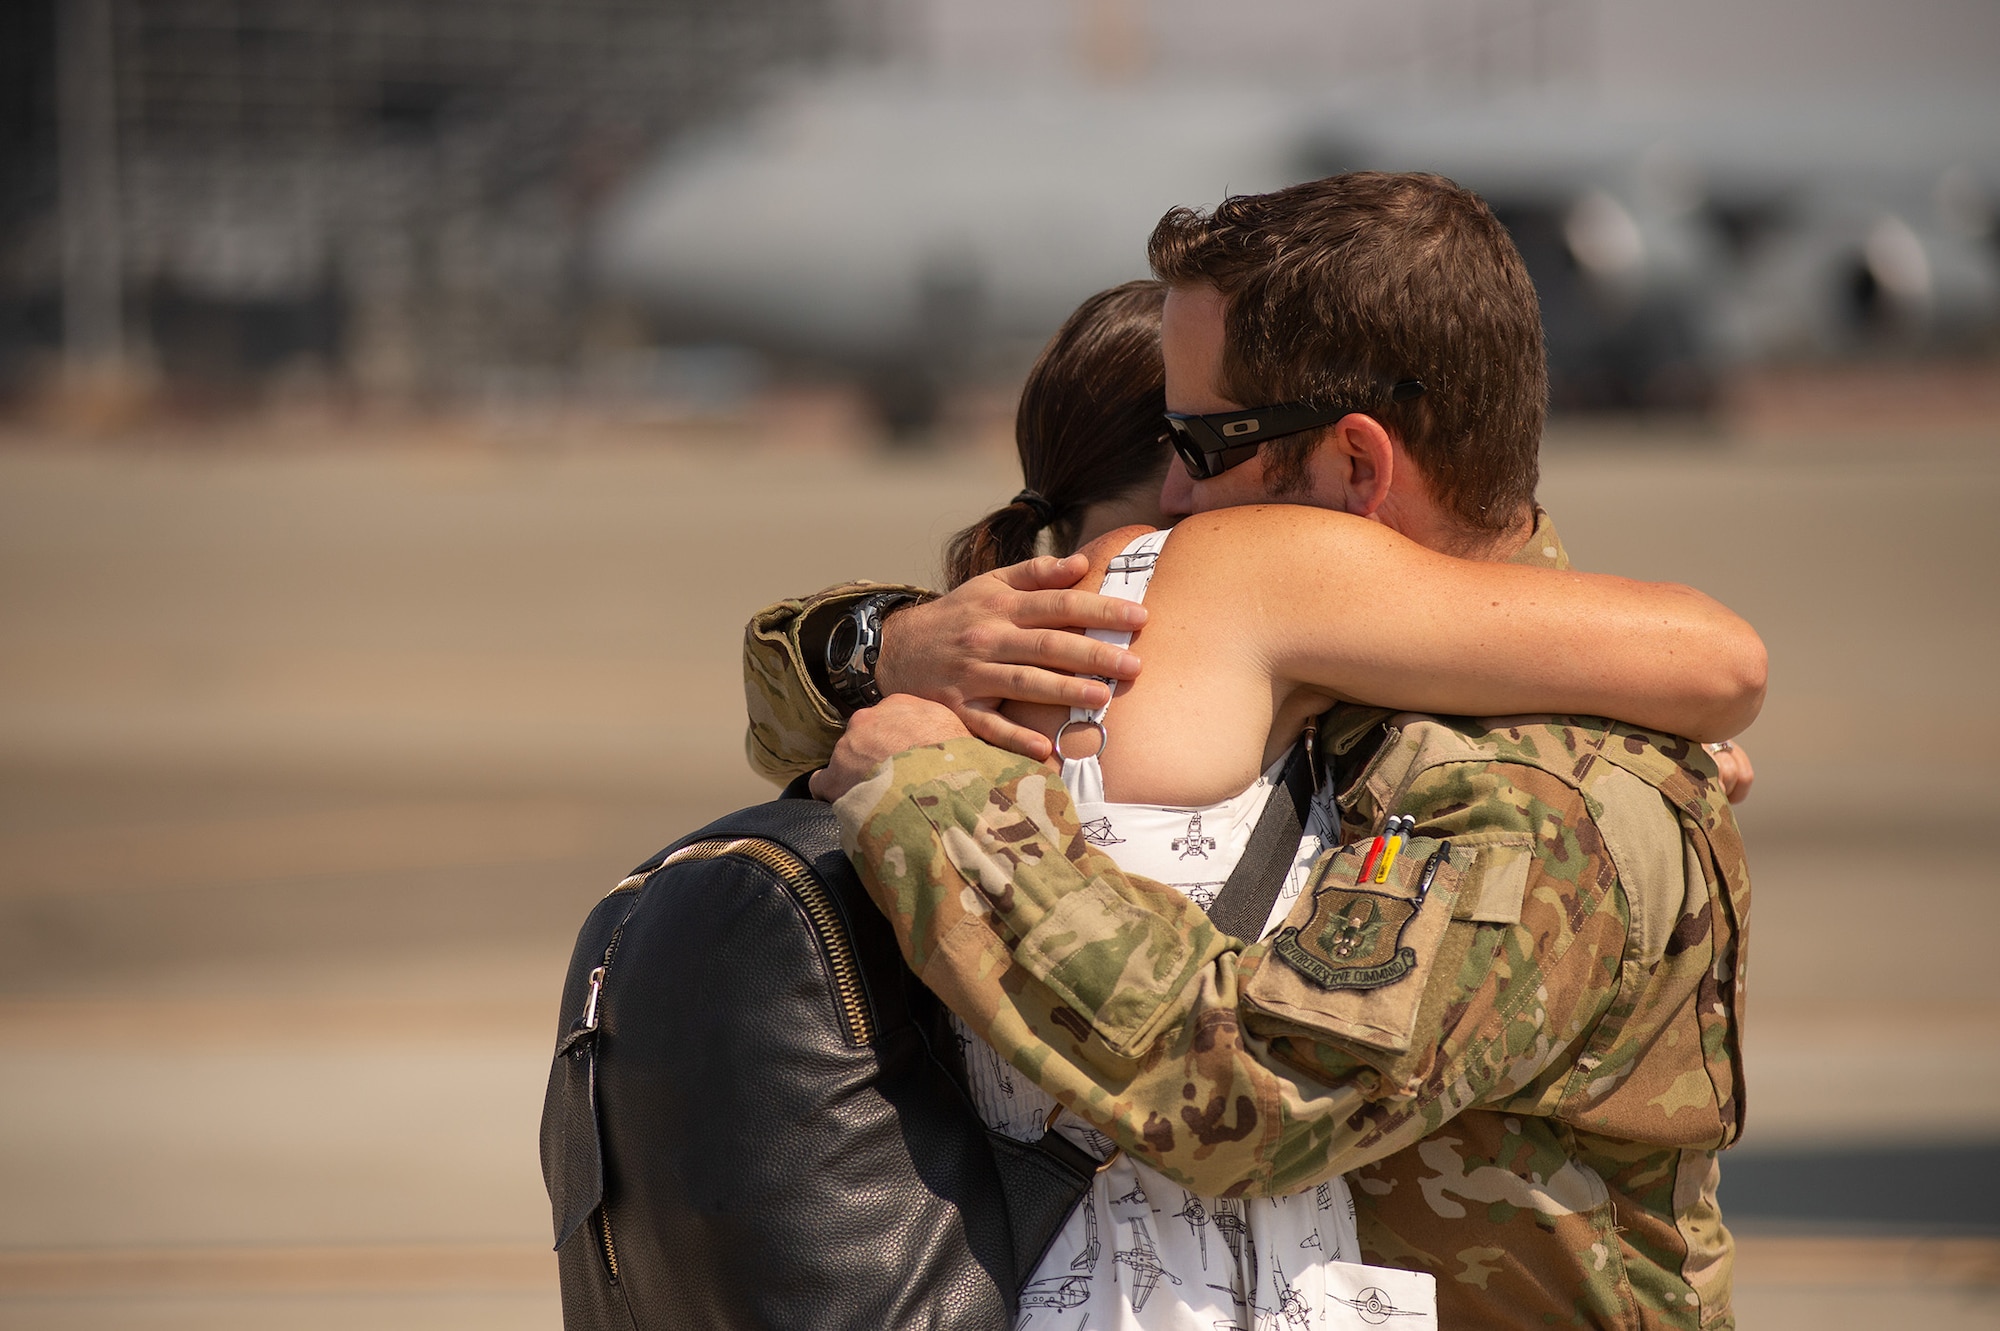 Maj. Dominic Calderon, a pilot from the 301st Airlift Squadron, embraces his wife upon arrival at Travis Air Force Base, California, September 14, 2021. Calderon's C-17 Globemaster III aircrew helped evacuate hundreds of American citizens, Special Immigrant Visa applicants and vulnerable Afghans from Afghanistan in support of Operation Allies Welcome